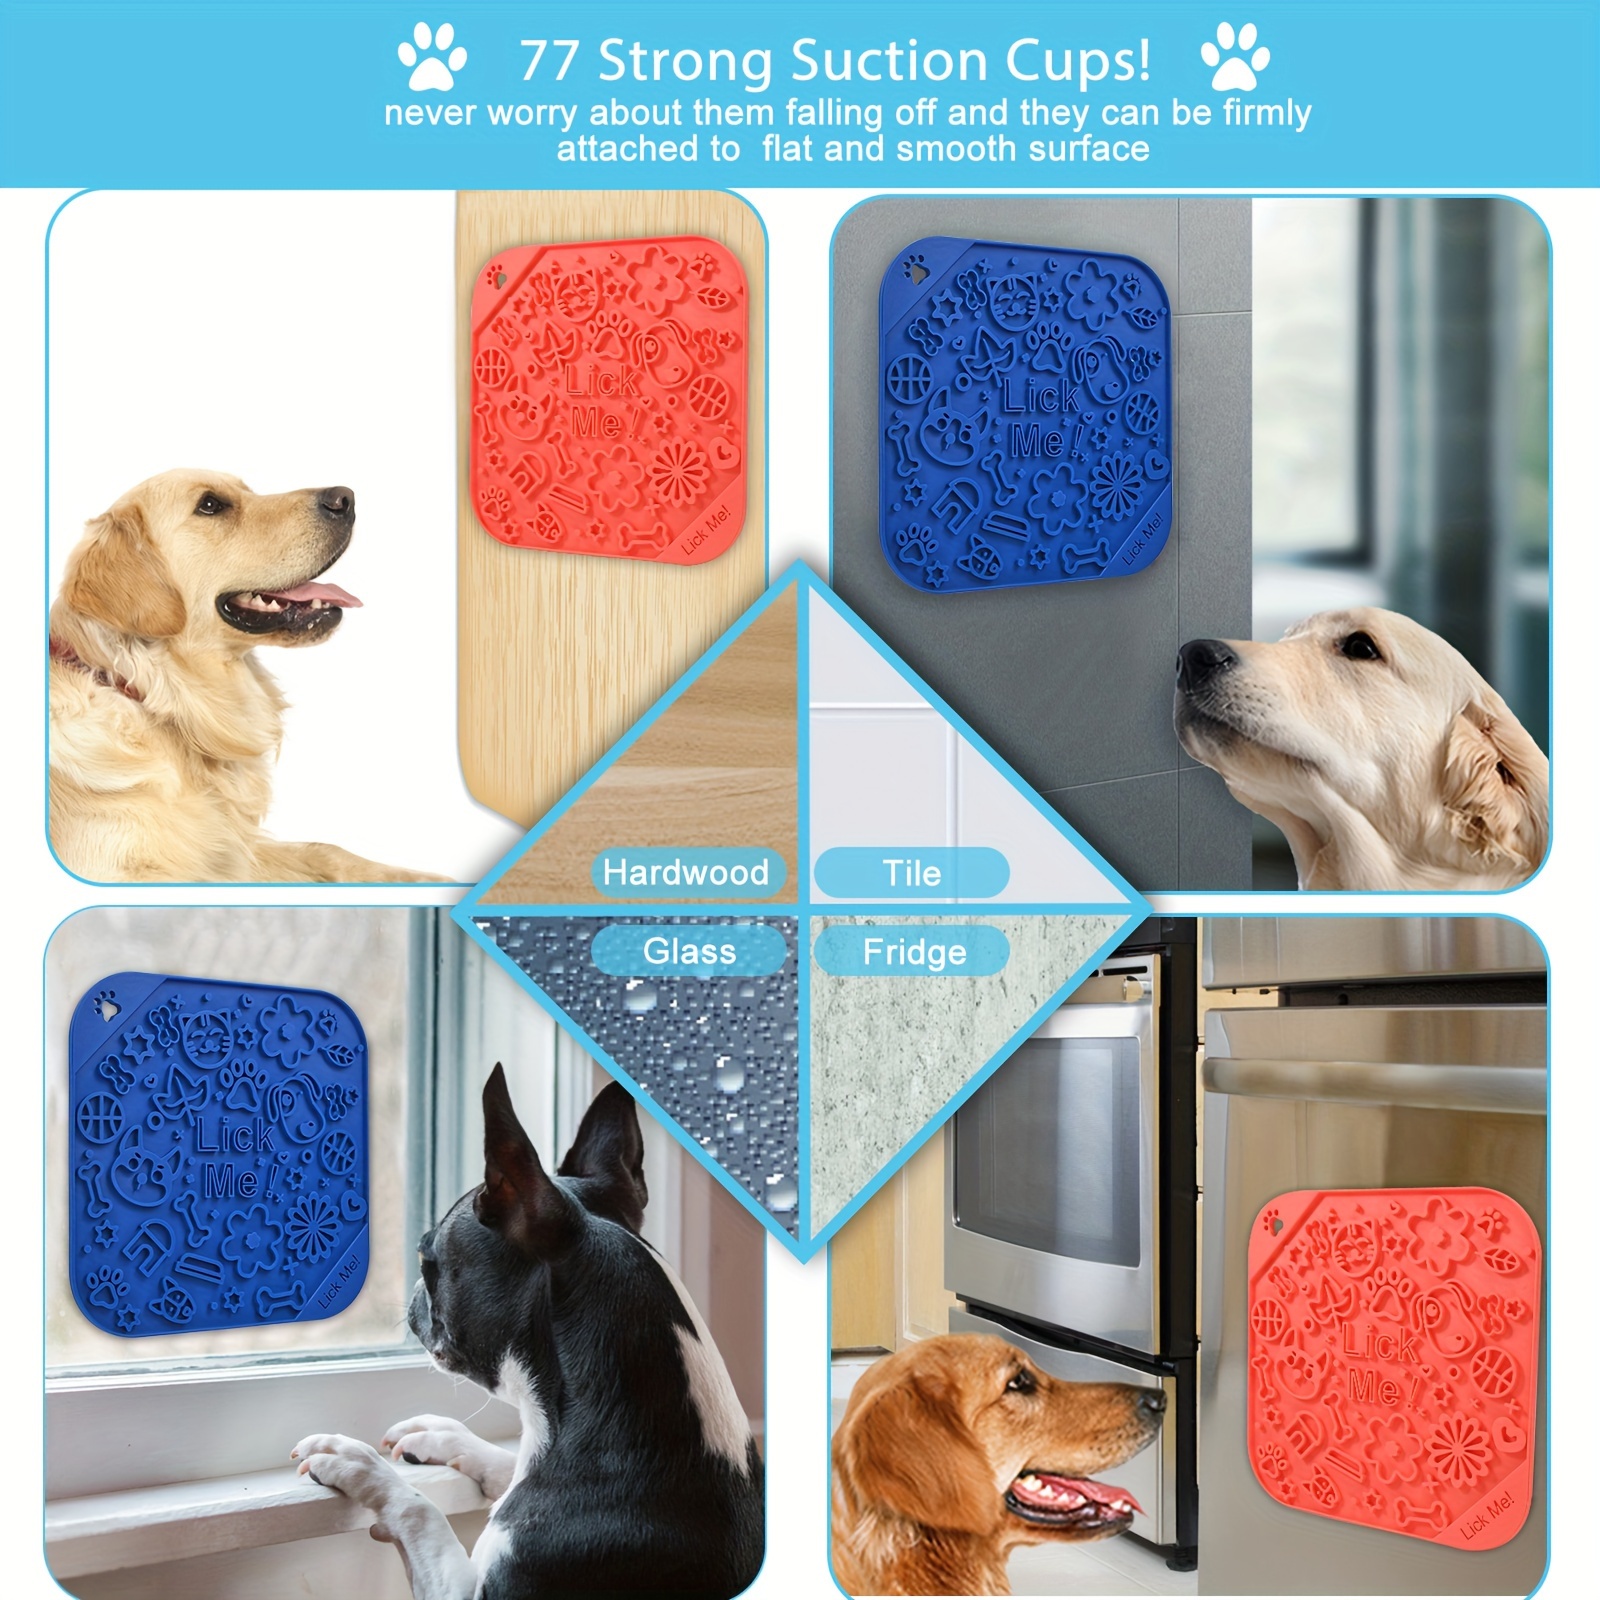 2 Pack Pad For Dog Lick, Pet Boredom Buster Lick Mat Slow Feeders